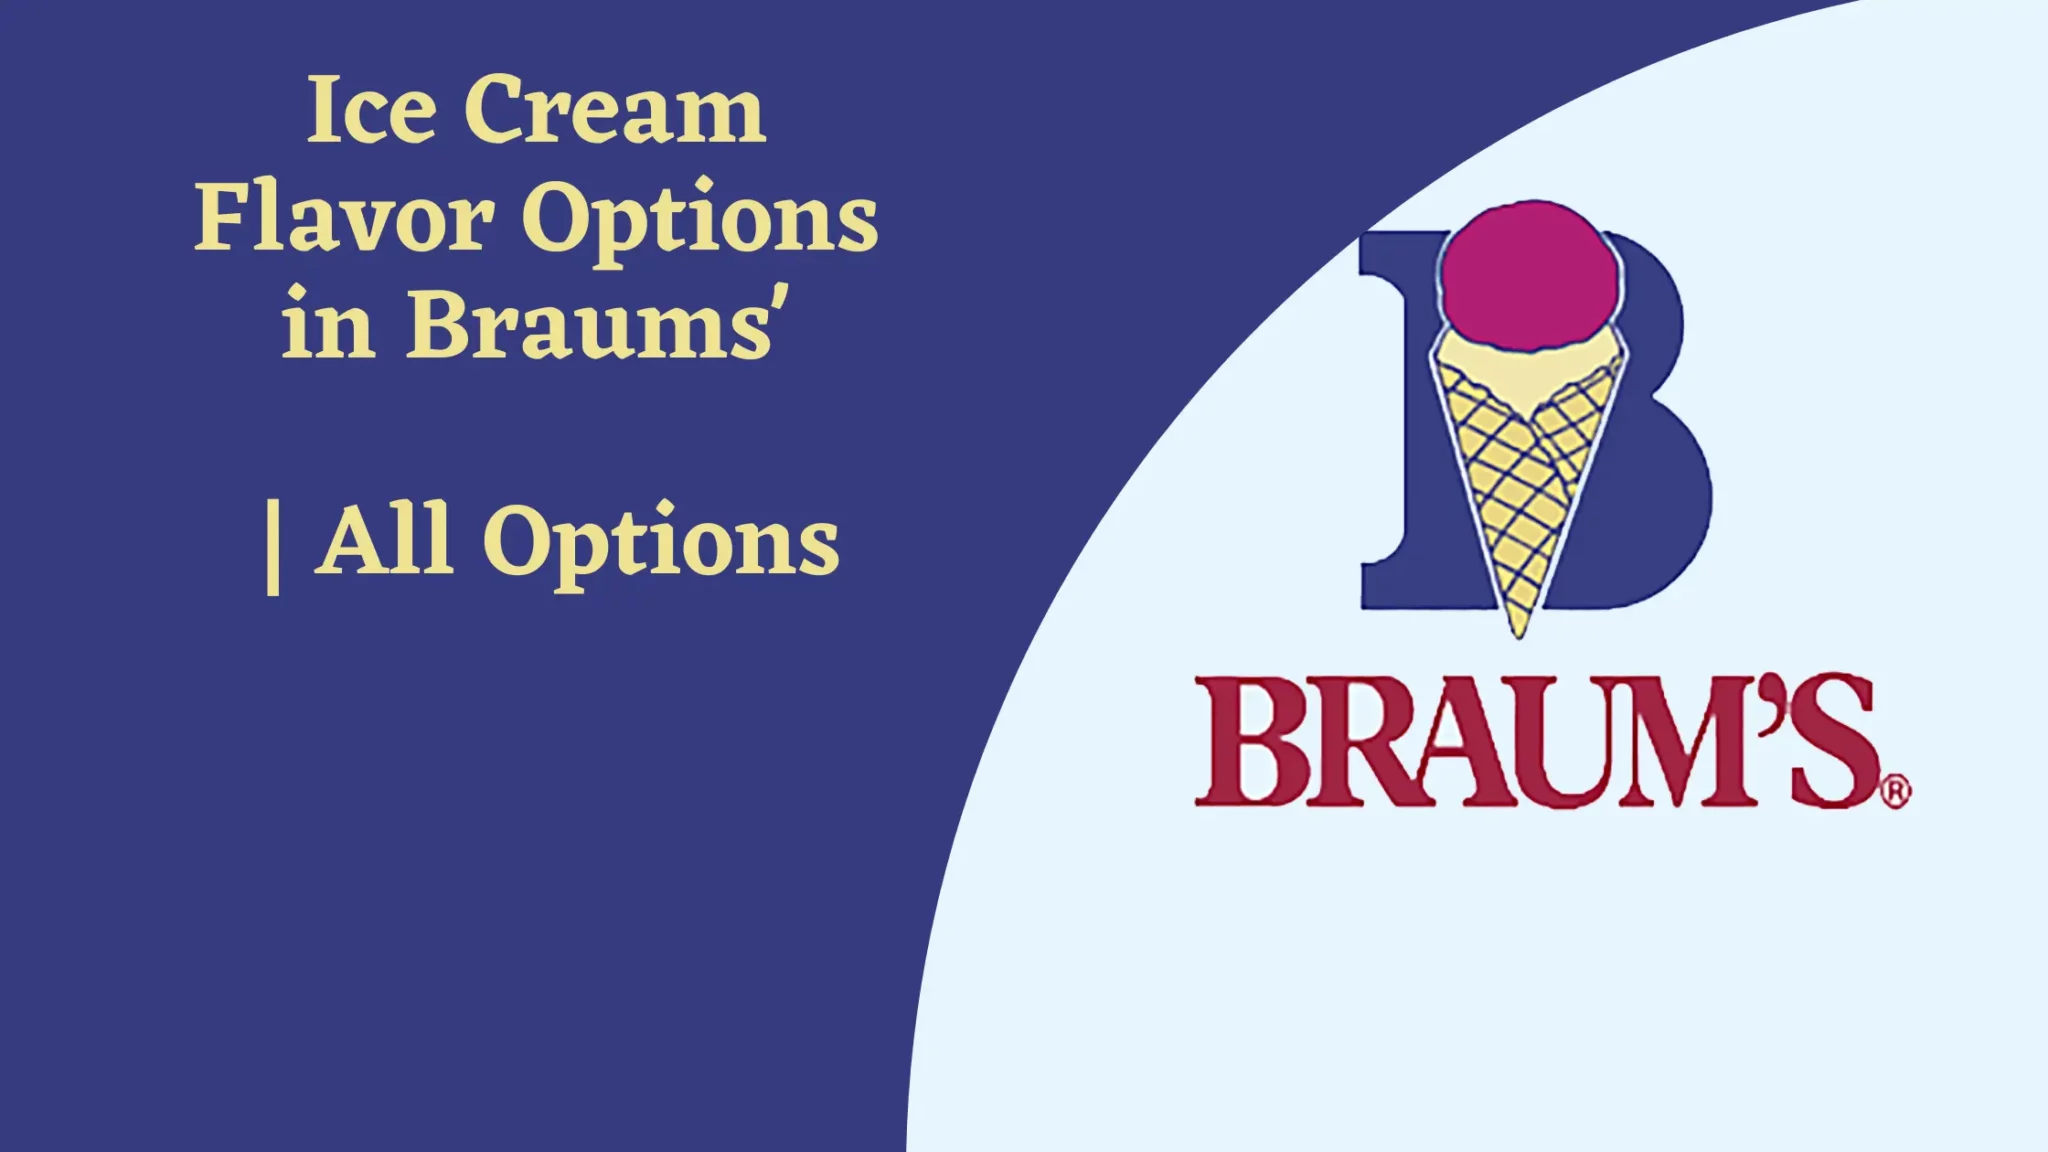 Ice Cream Flavor Options in Braums' | All Options in 2022